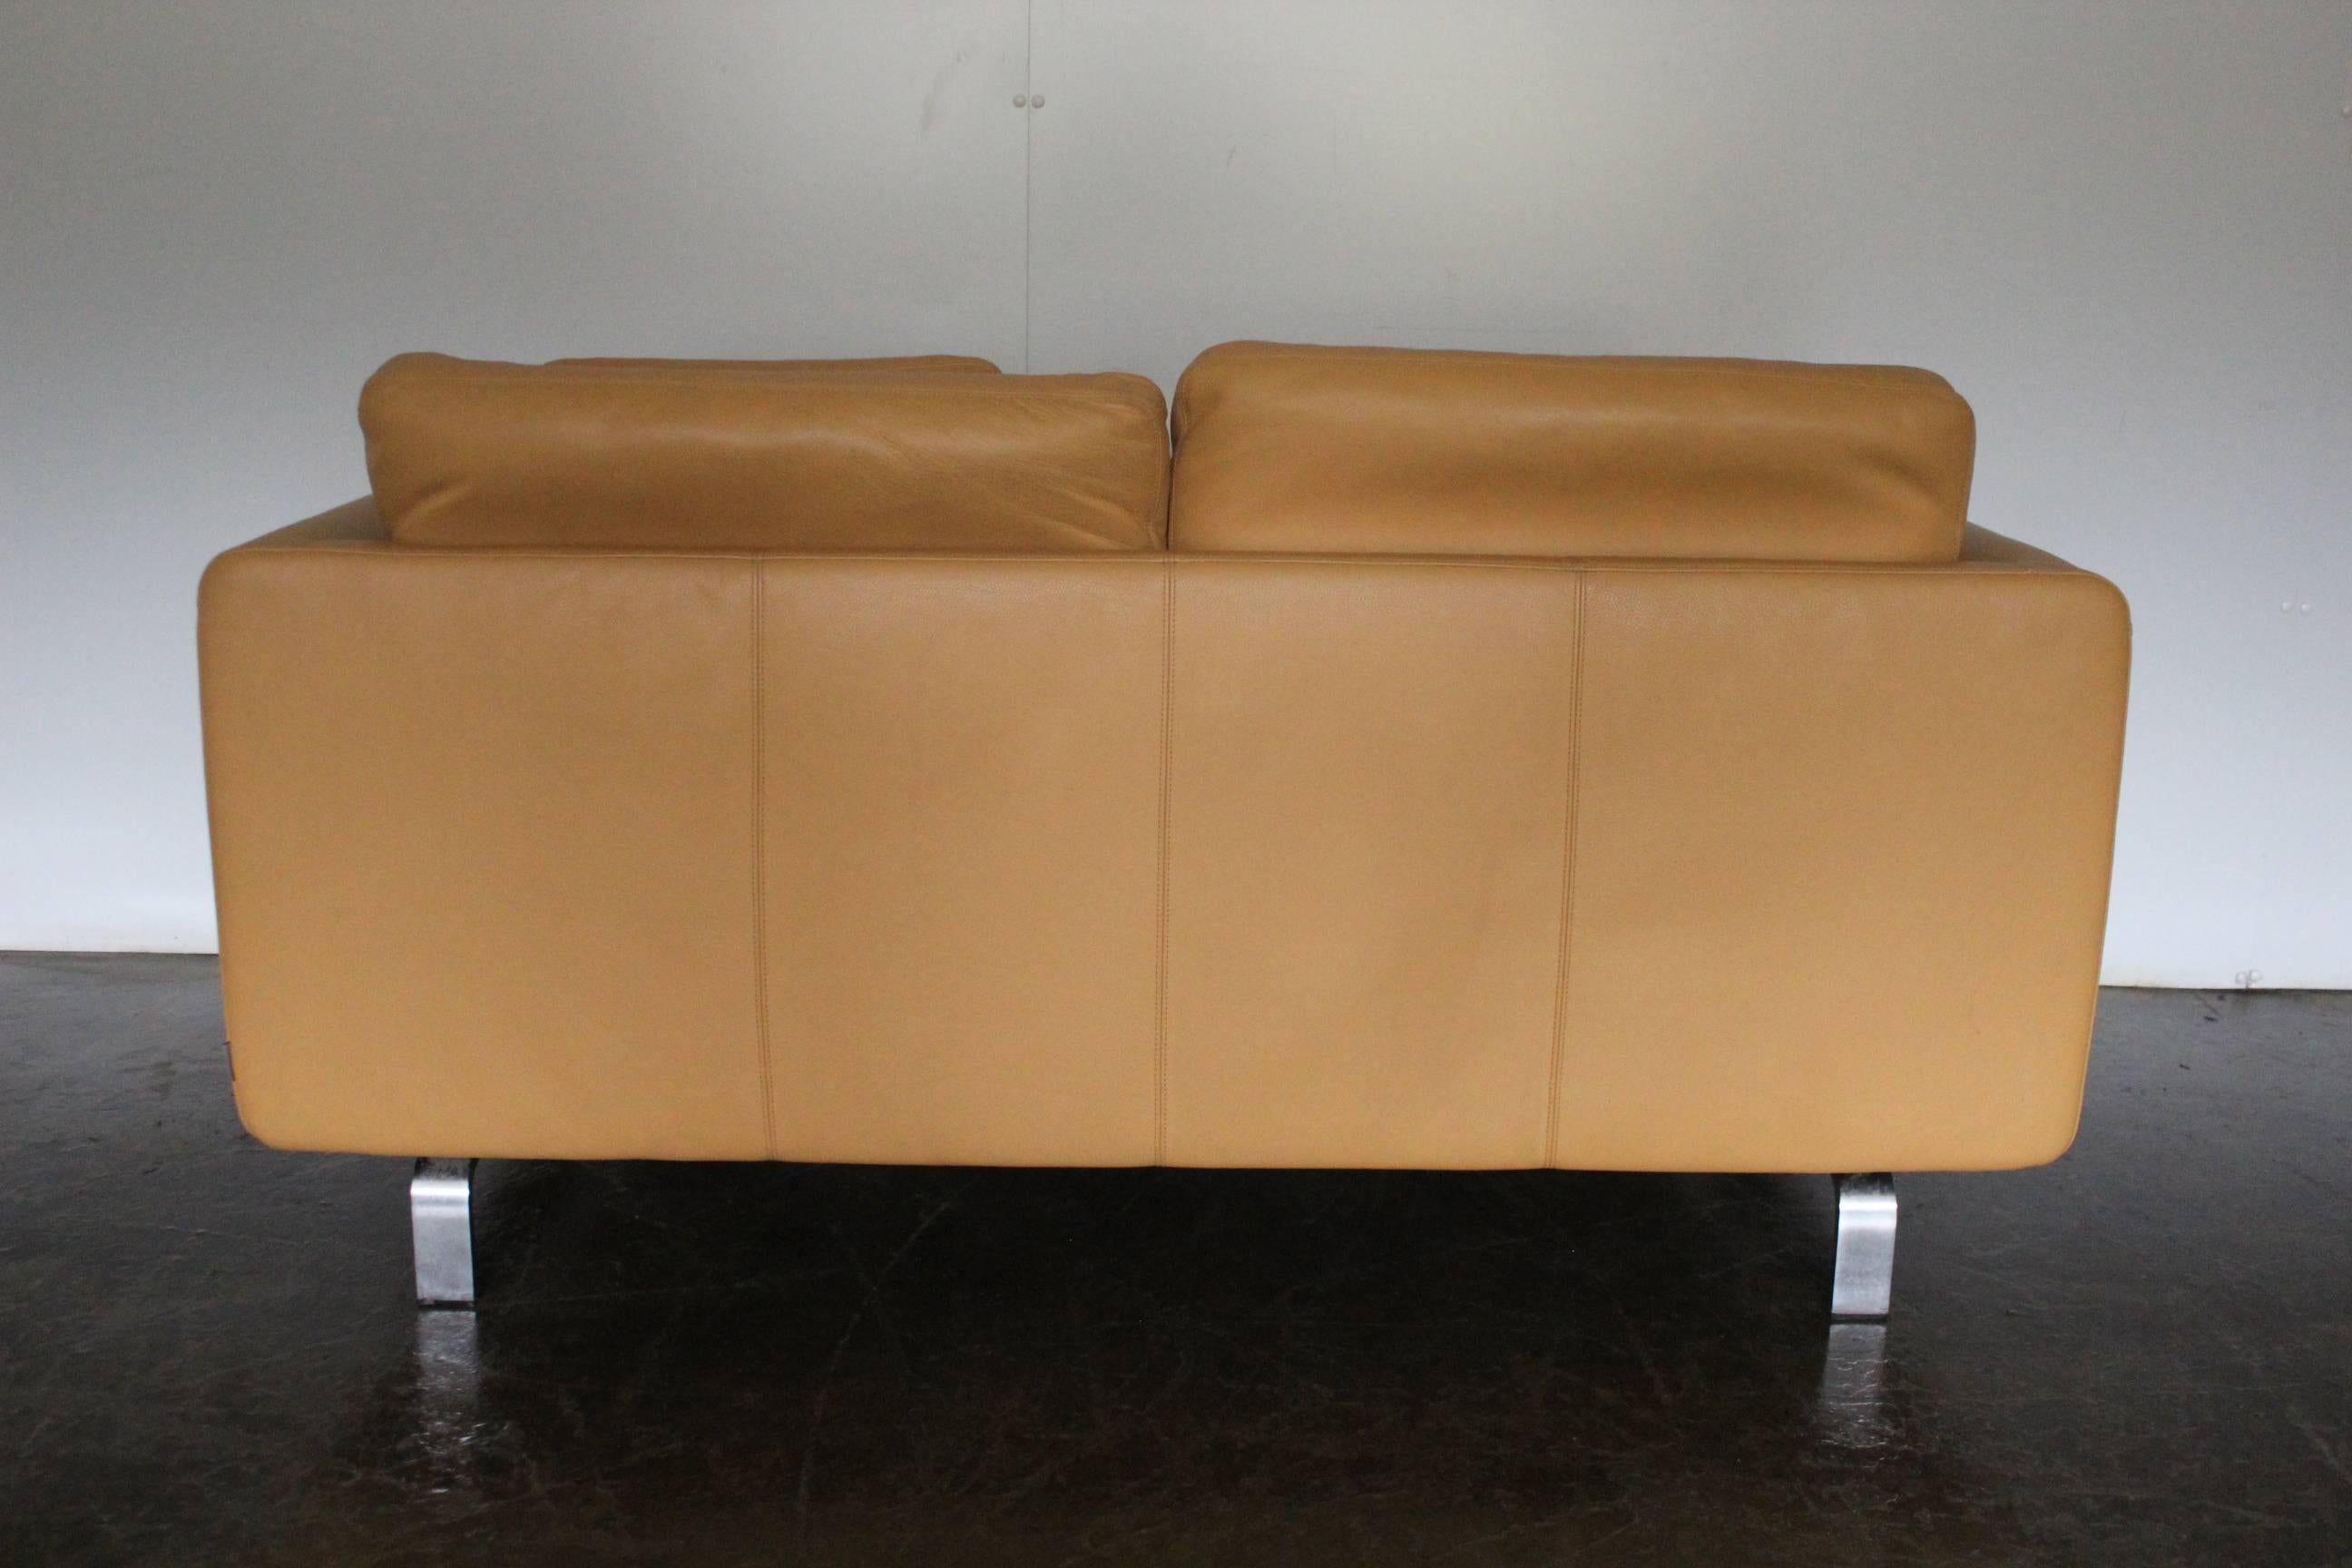 Modern Pair of Walter Knoll Two-Seat Sofas in Pristine Pale-Tan Leather